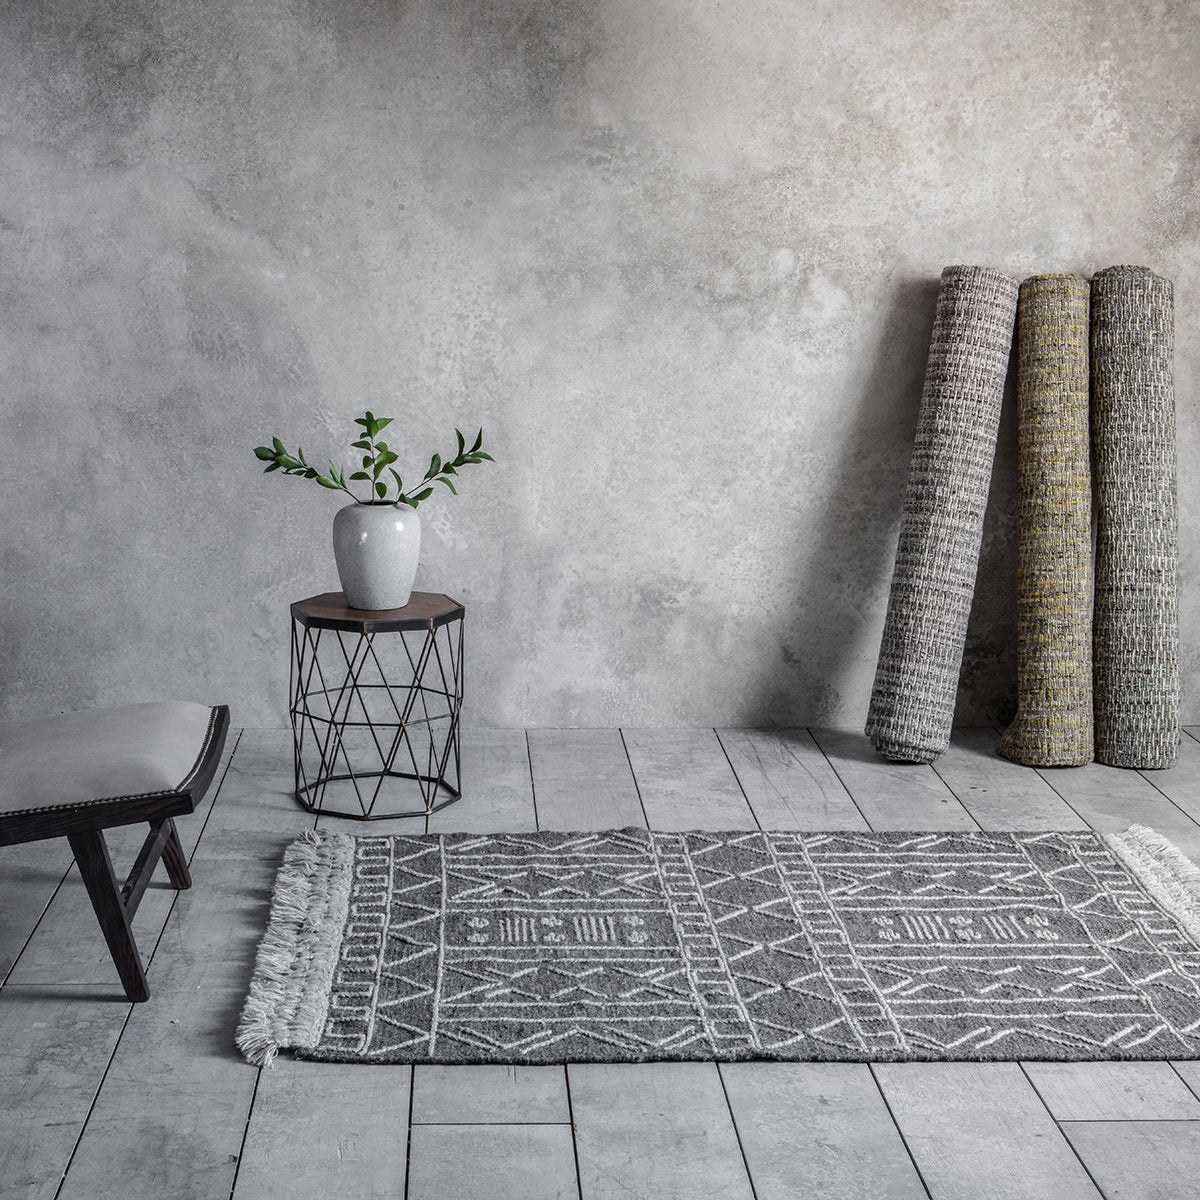 An Aish Rug 1200x1700mm in a concrete room for interior decor.